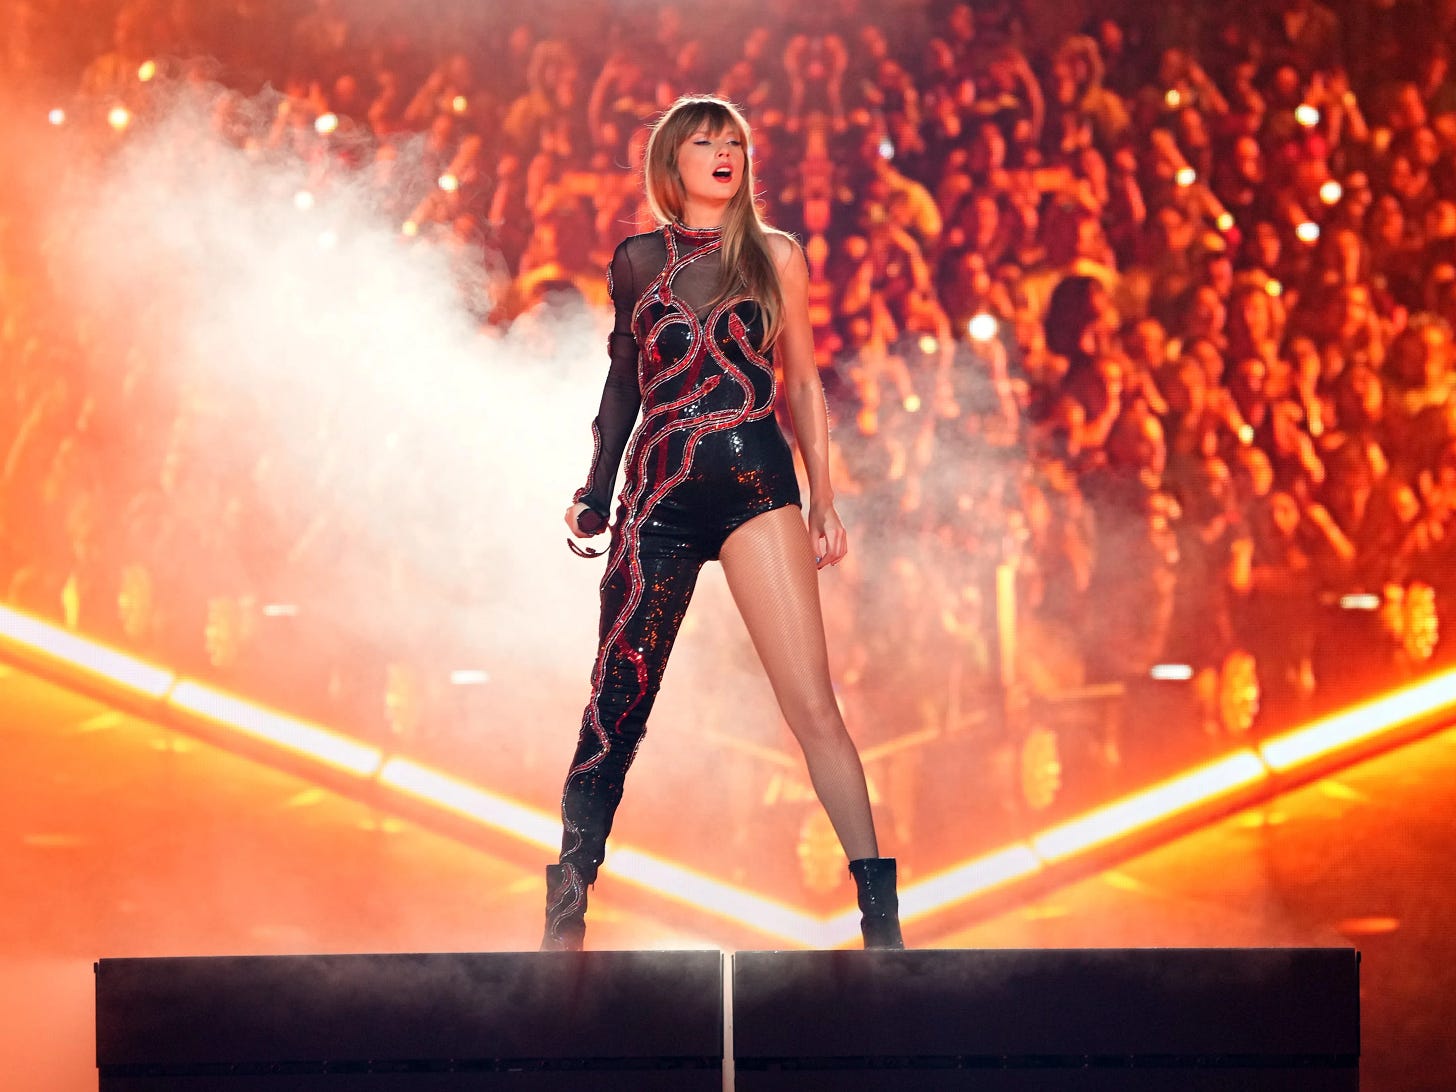 Taylor's Eras Tour Reputation costume. Black with one sleeve and one leg, covered with a red snake.